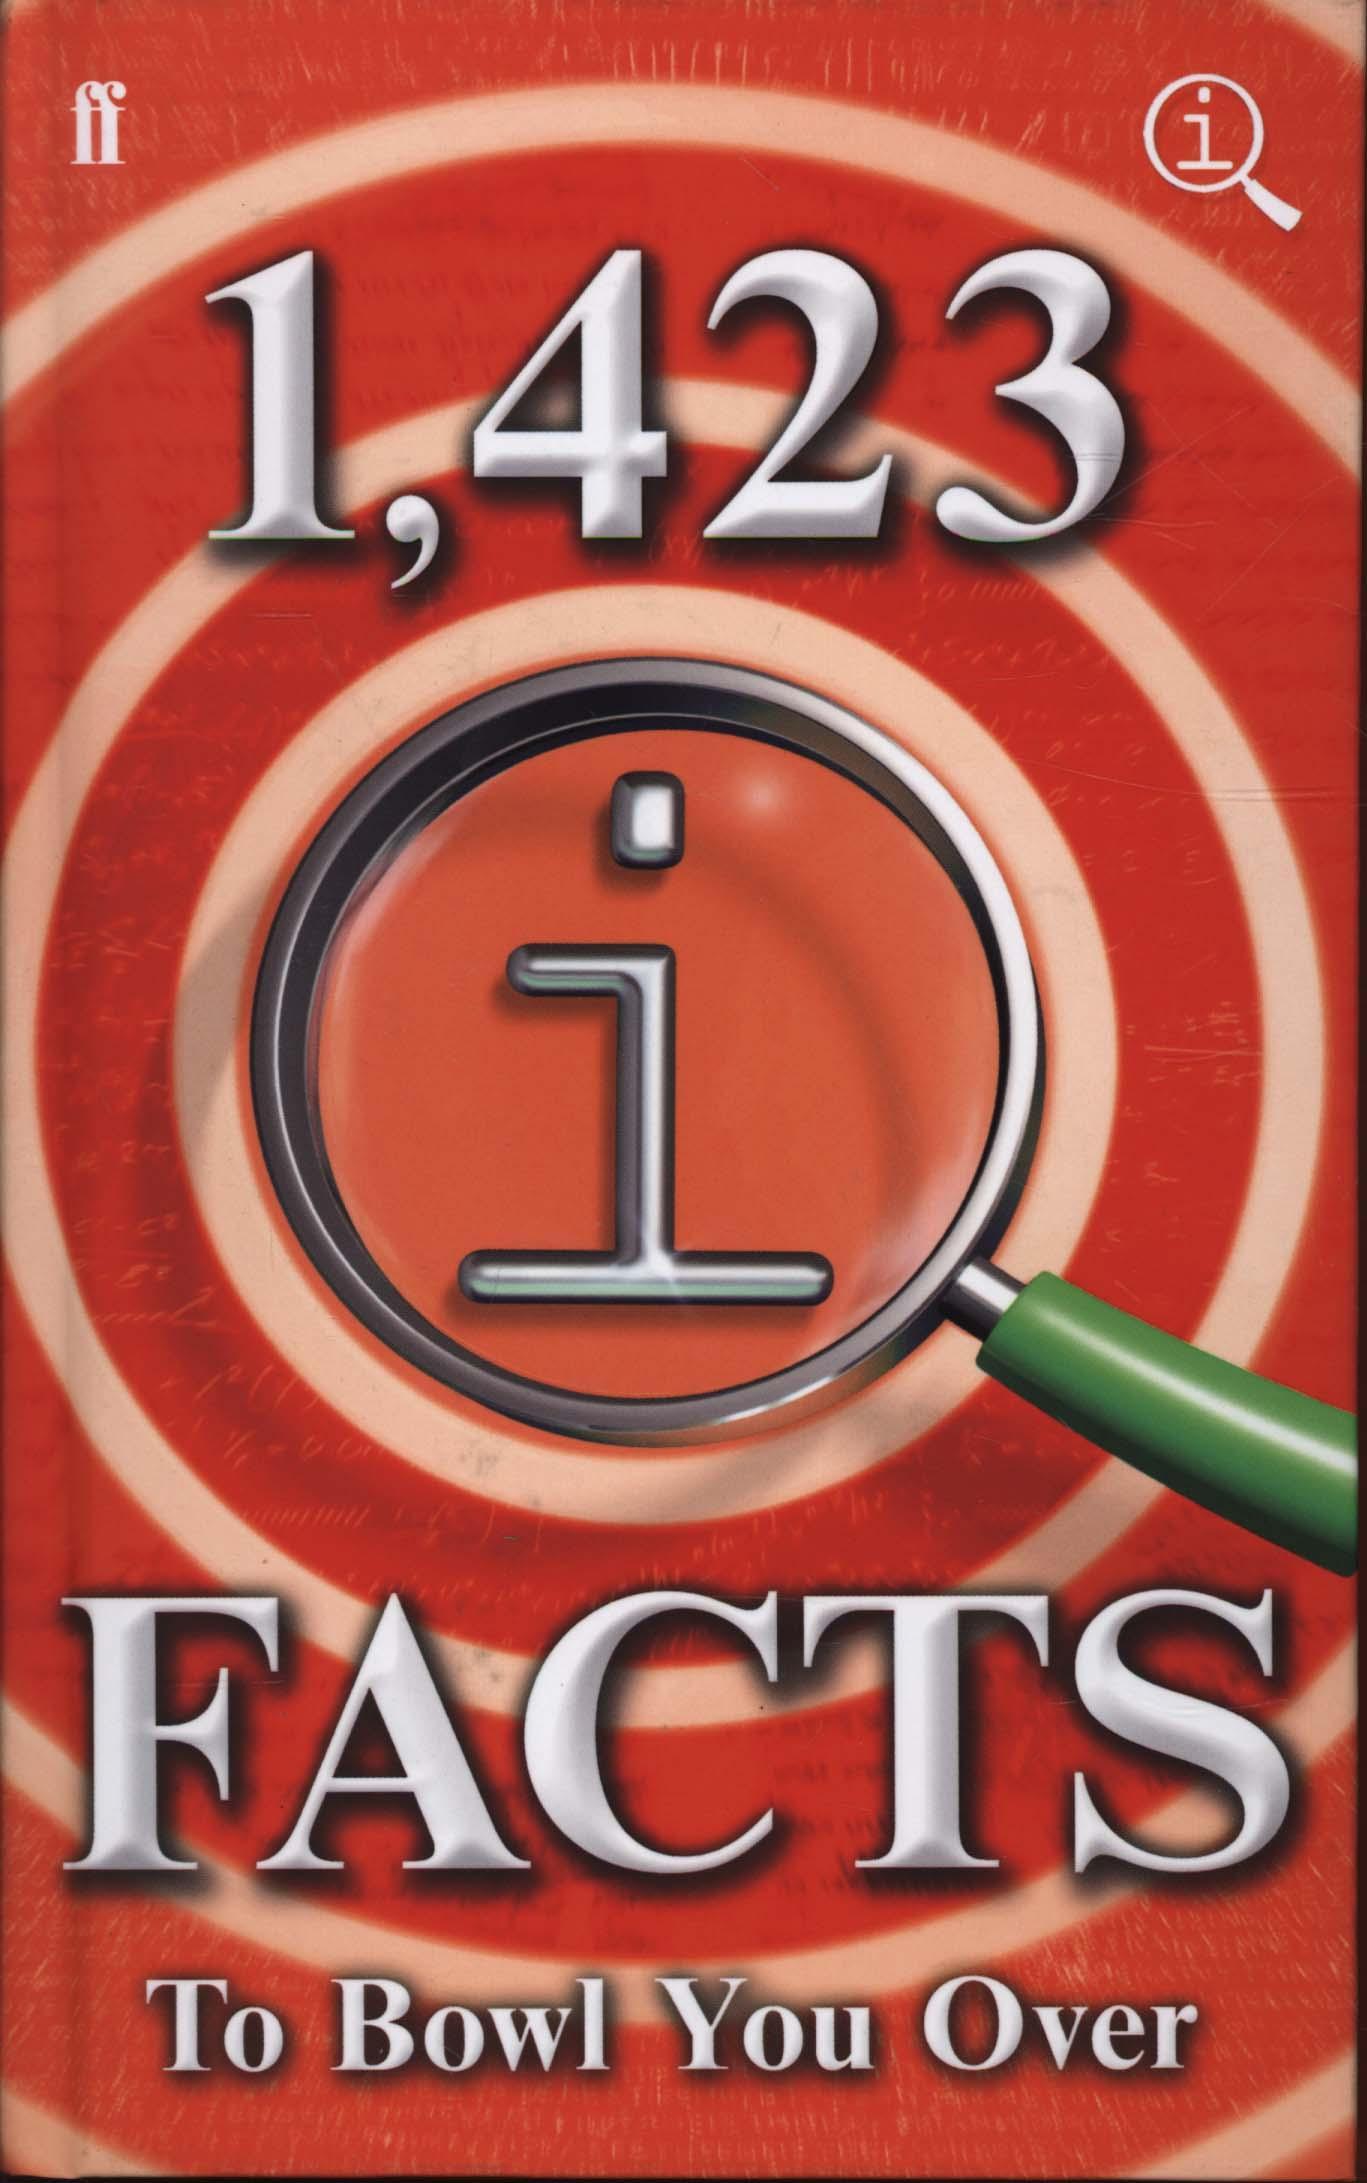 1,423 QI Facts to Bowl You Over - Anne Miller